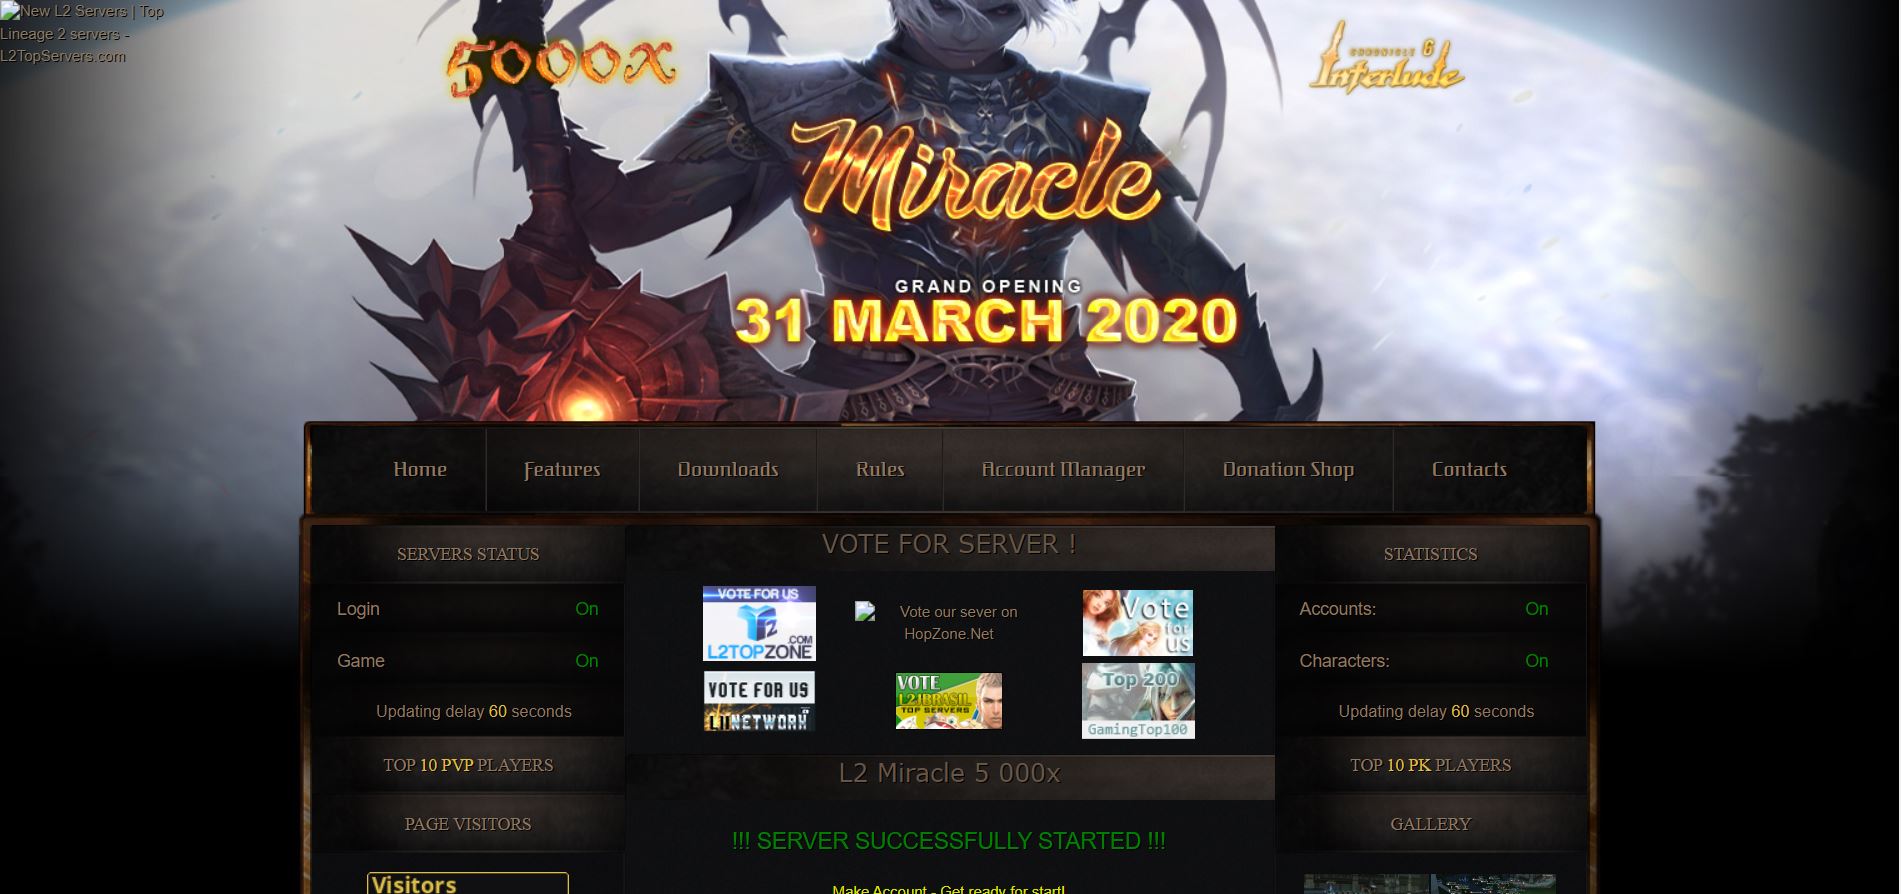 💥 Feel the Battle Magic on L2Miracle Interlude x5000! ⚔️